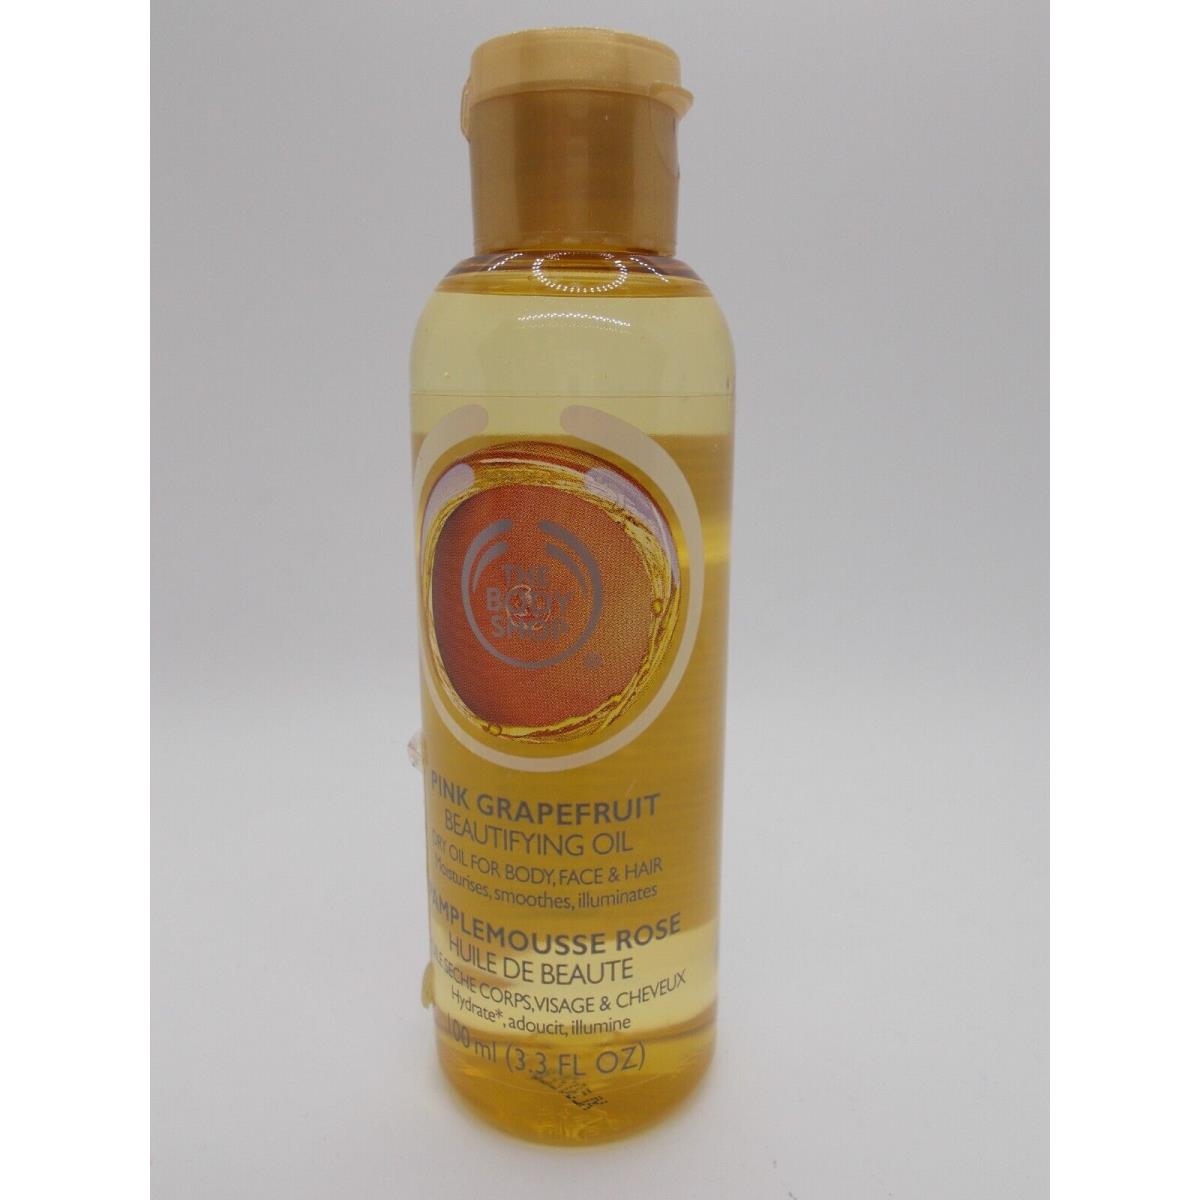 The Body Shop Pink Grapefruit Beautifying Oil Dry Oil For Body Face Hair